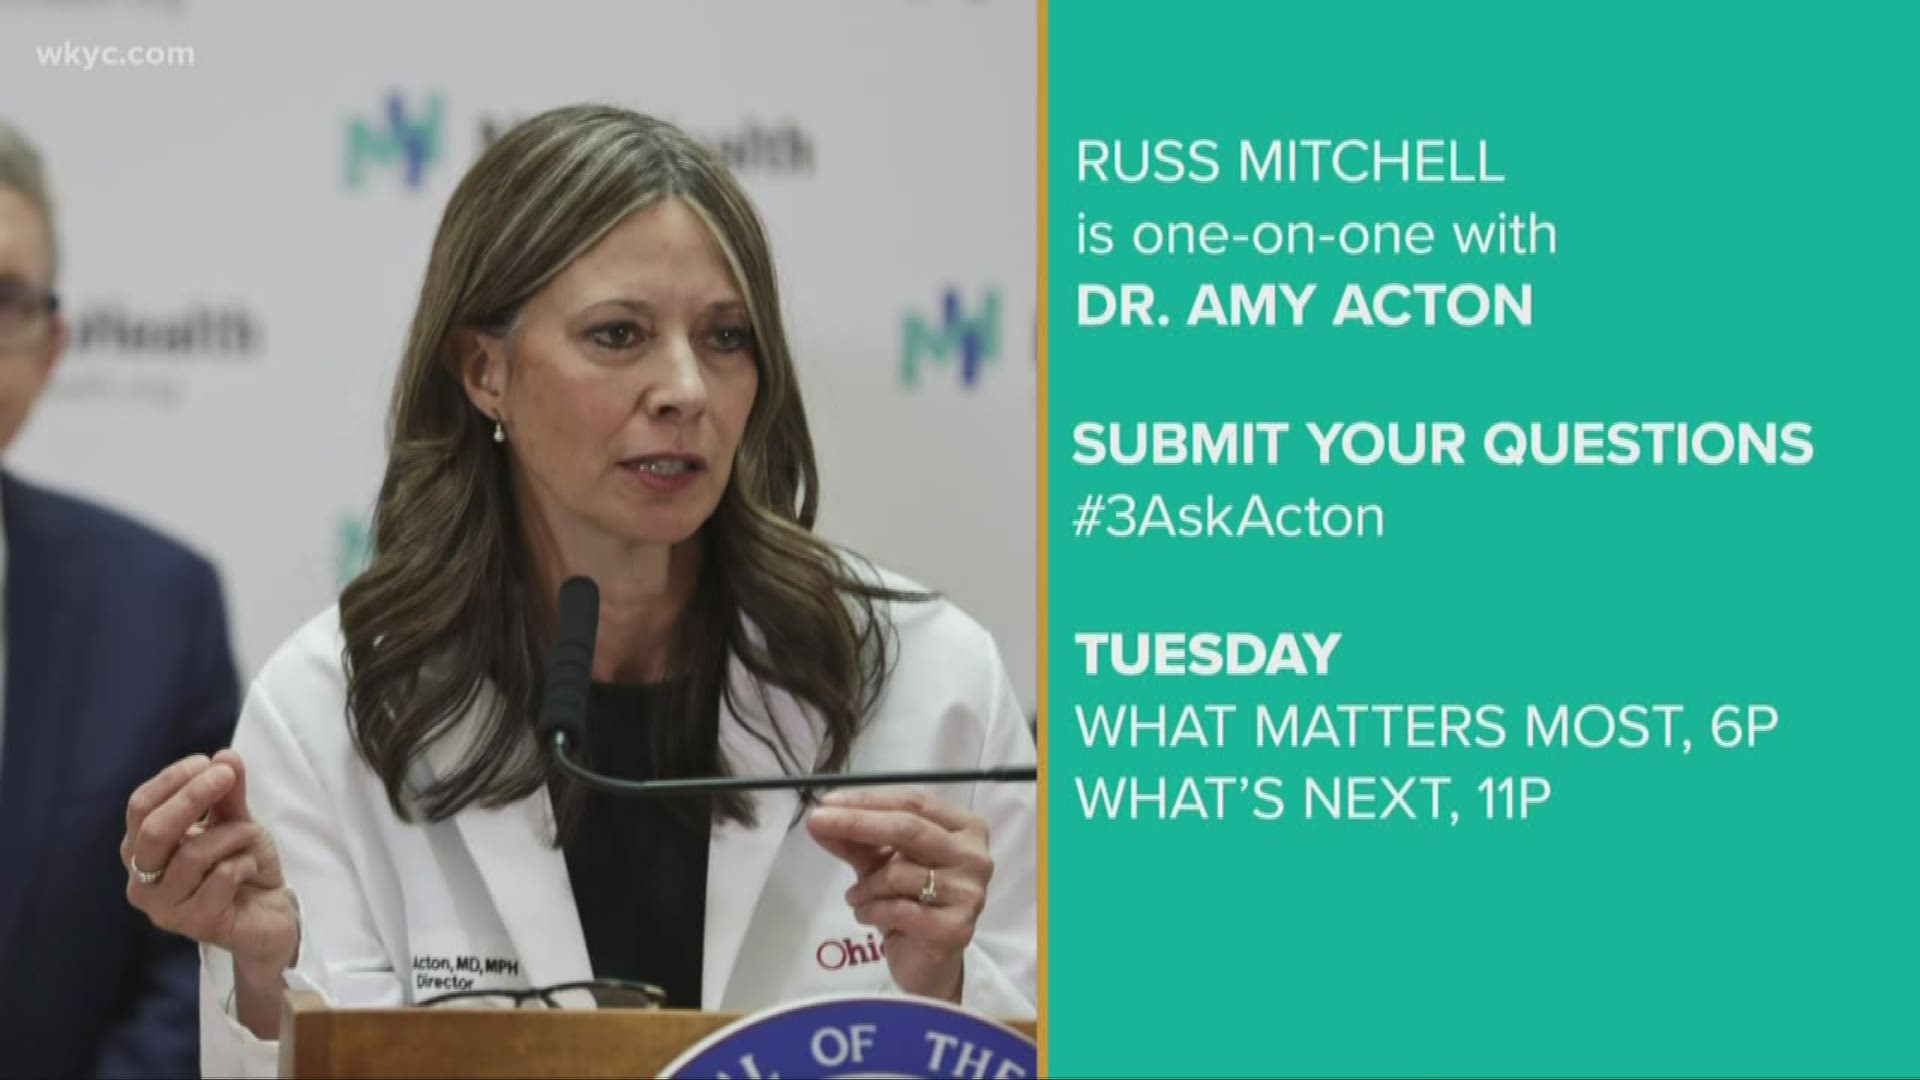 Submit your questions for Dr. Acton using the hashtag #3AskActon. You can also text them to us at 216-344-3300.